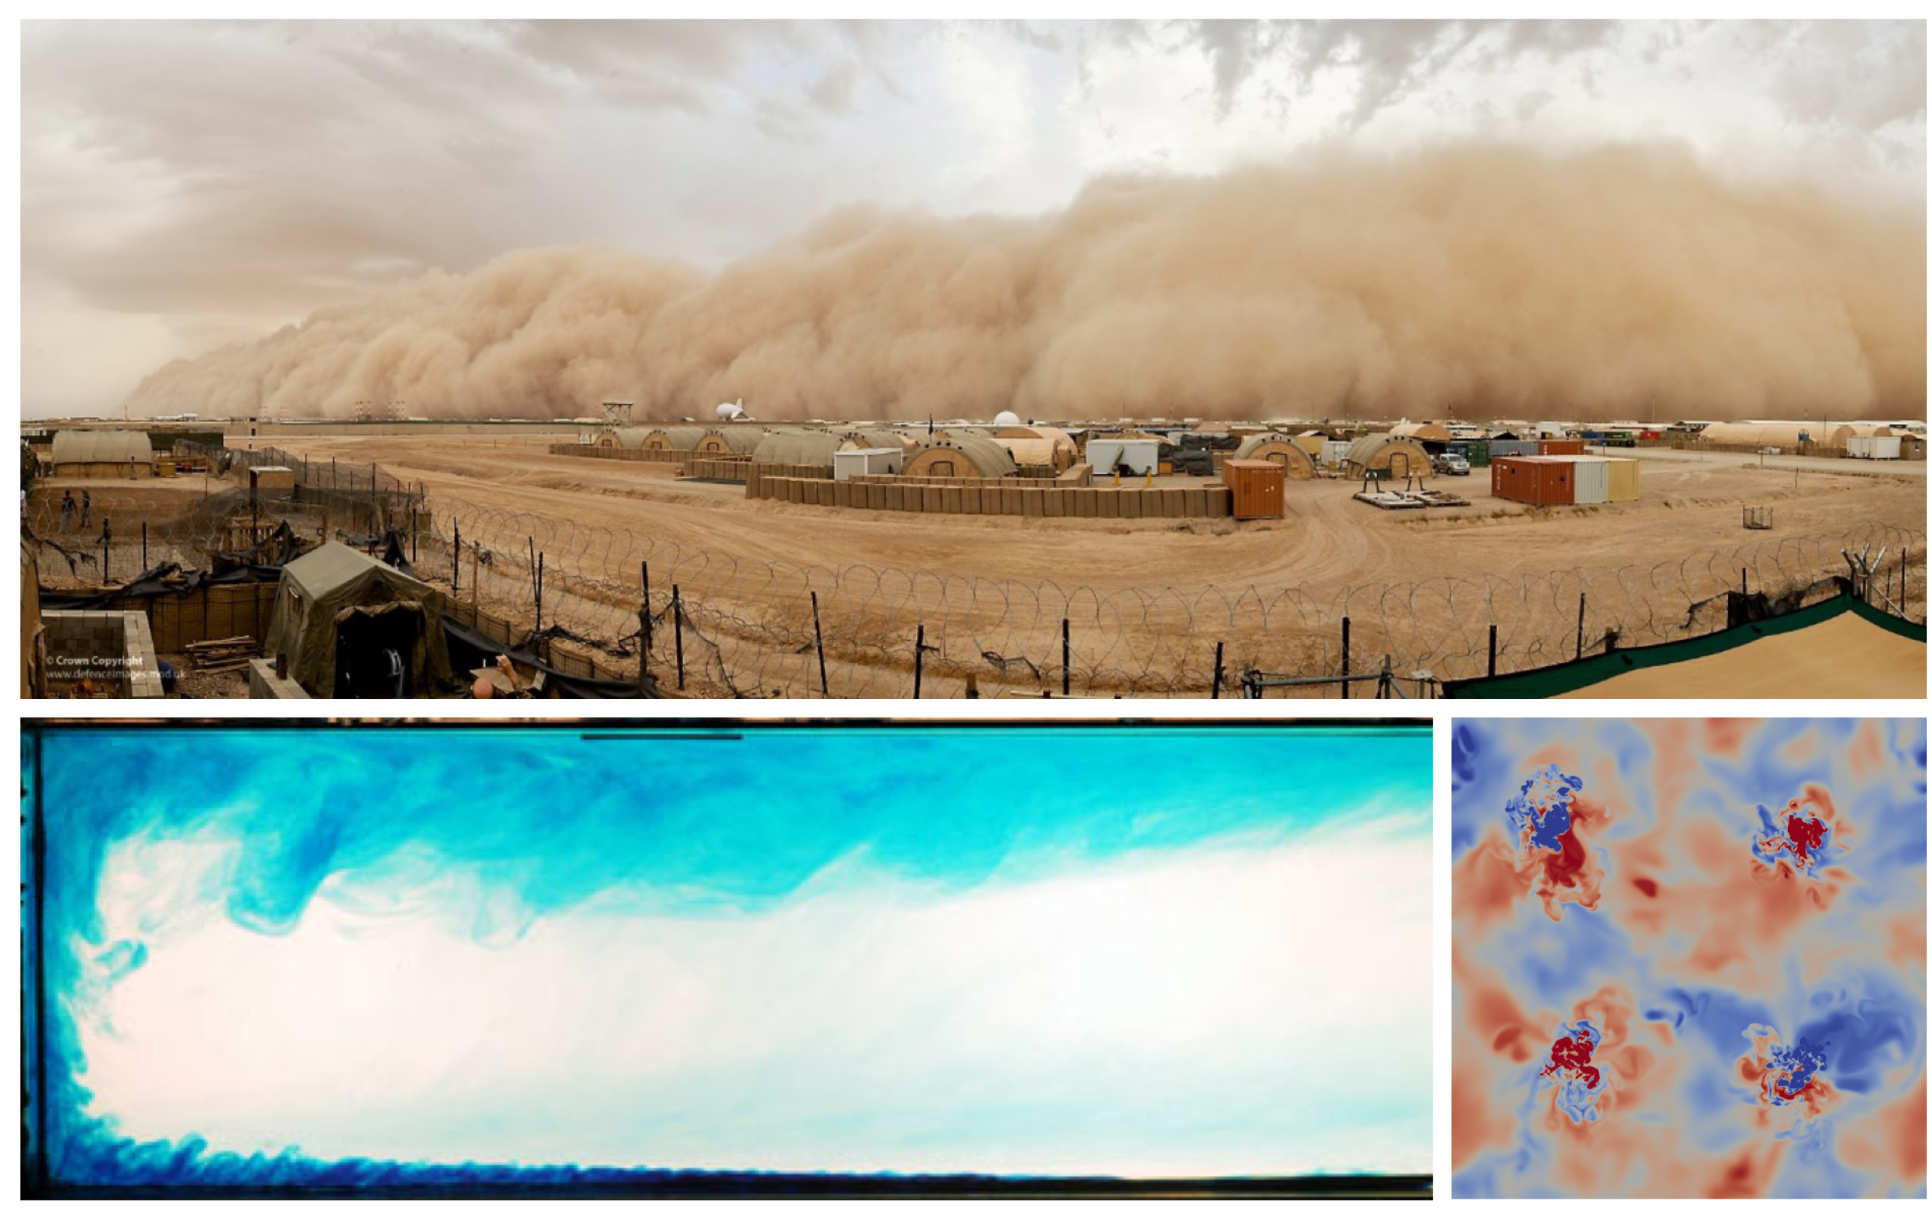 [Top] Dust storm in Afghanistan, [Bottom-left] Horizontal convection produced by the differential heating of a horizontal boundary condition, [Bottom-right] A horizontal slice though a confined space heated and cooled by isolated sources of buoyancy.  